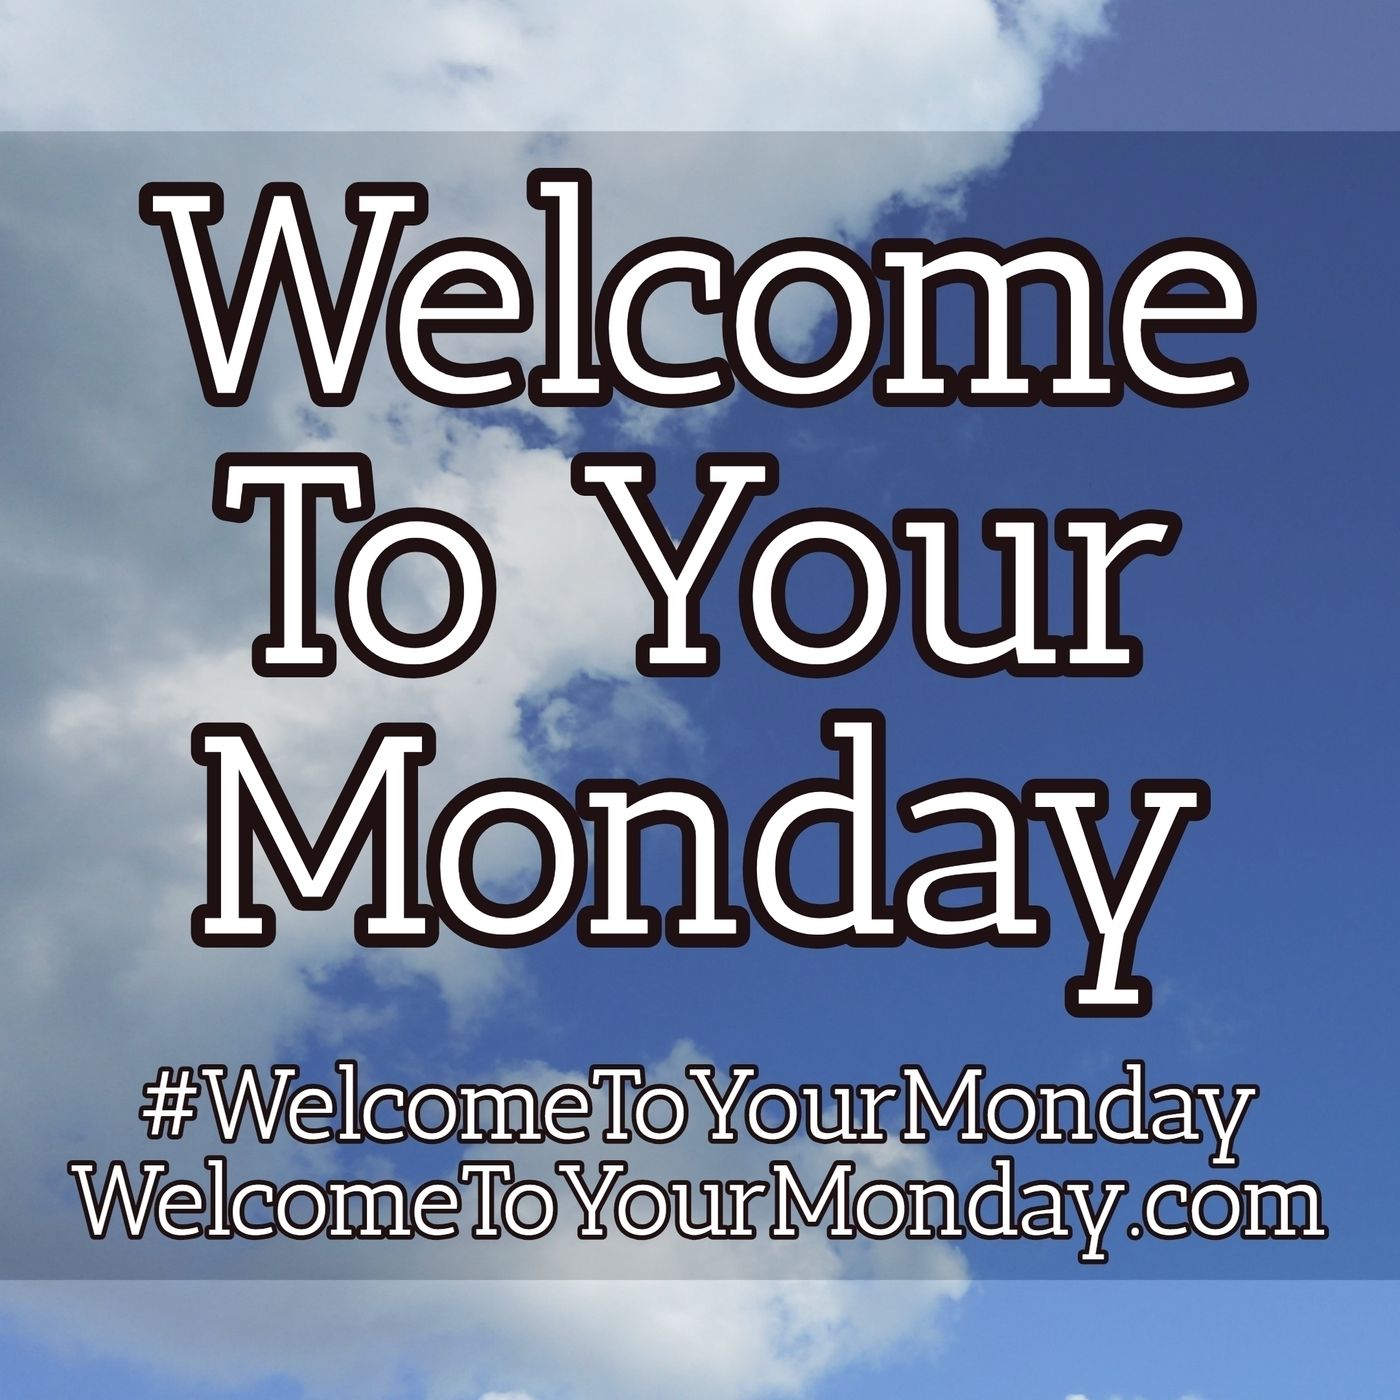 Welcome To Your Monday Message for 11/5/2018